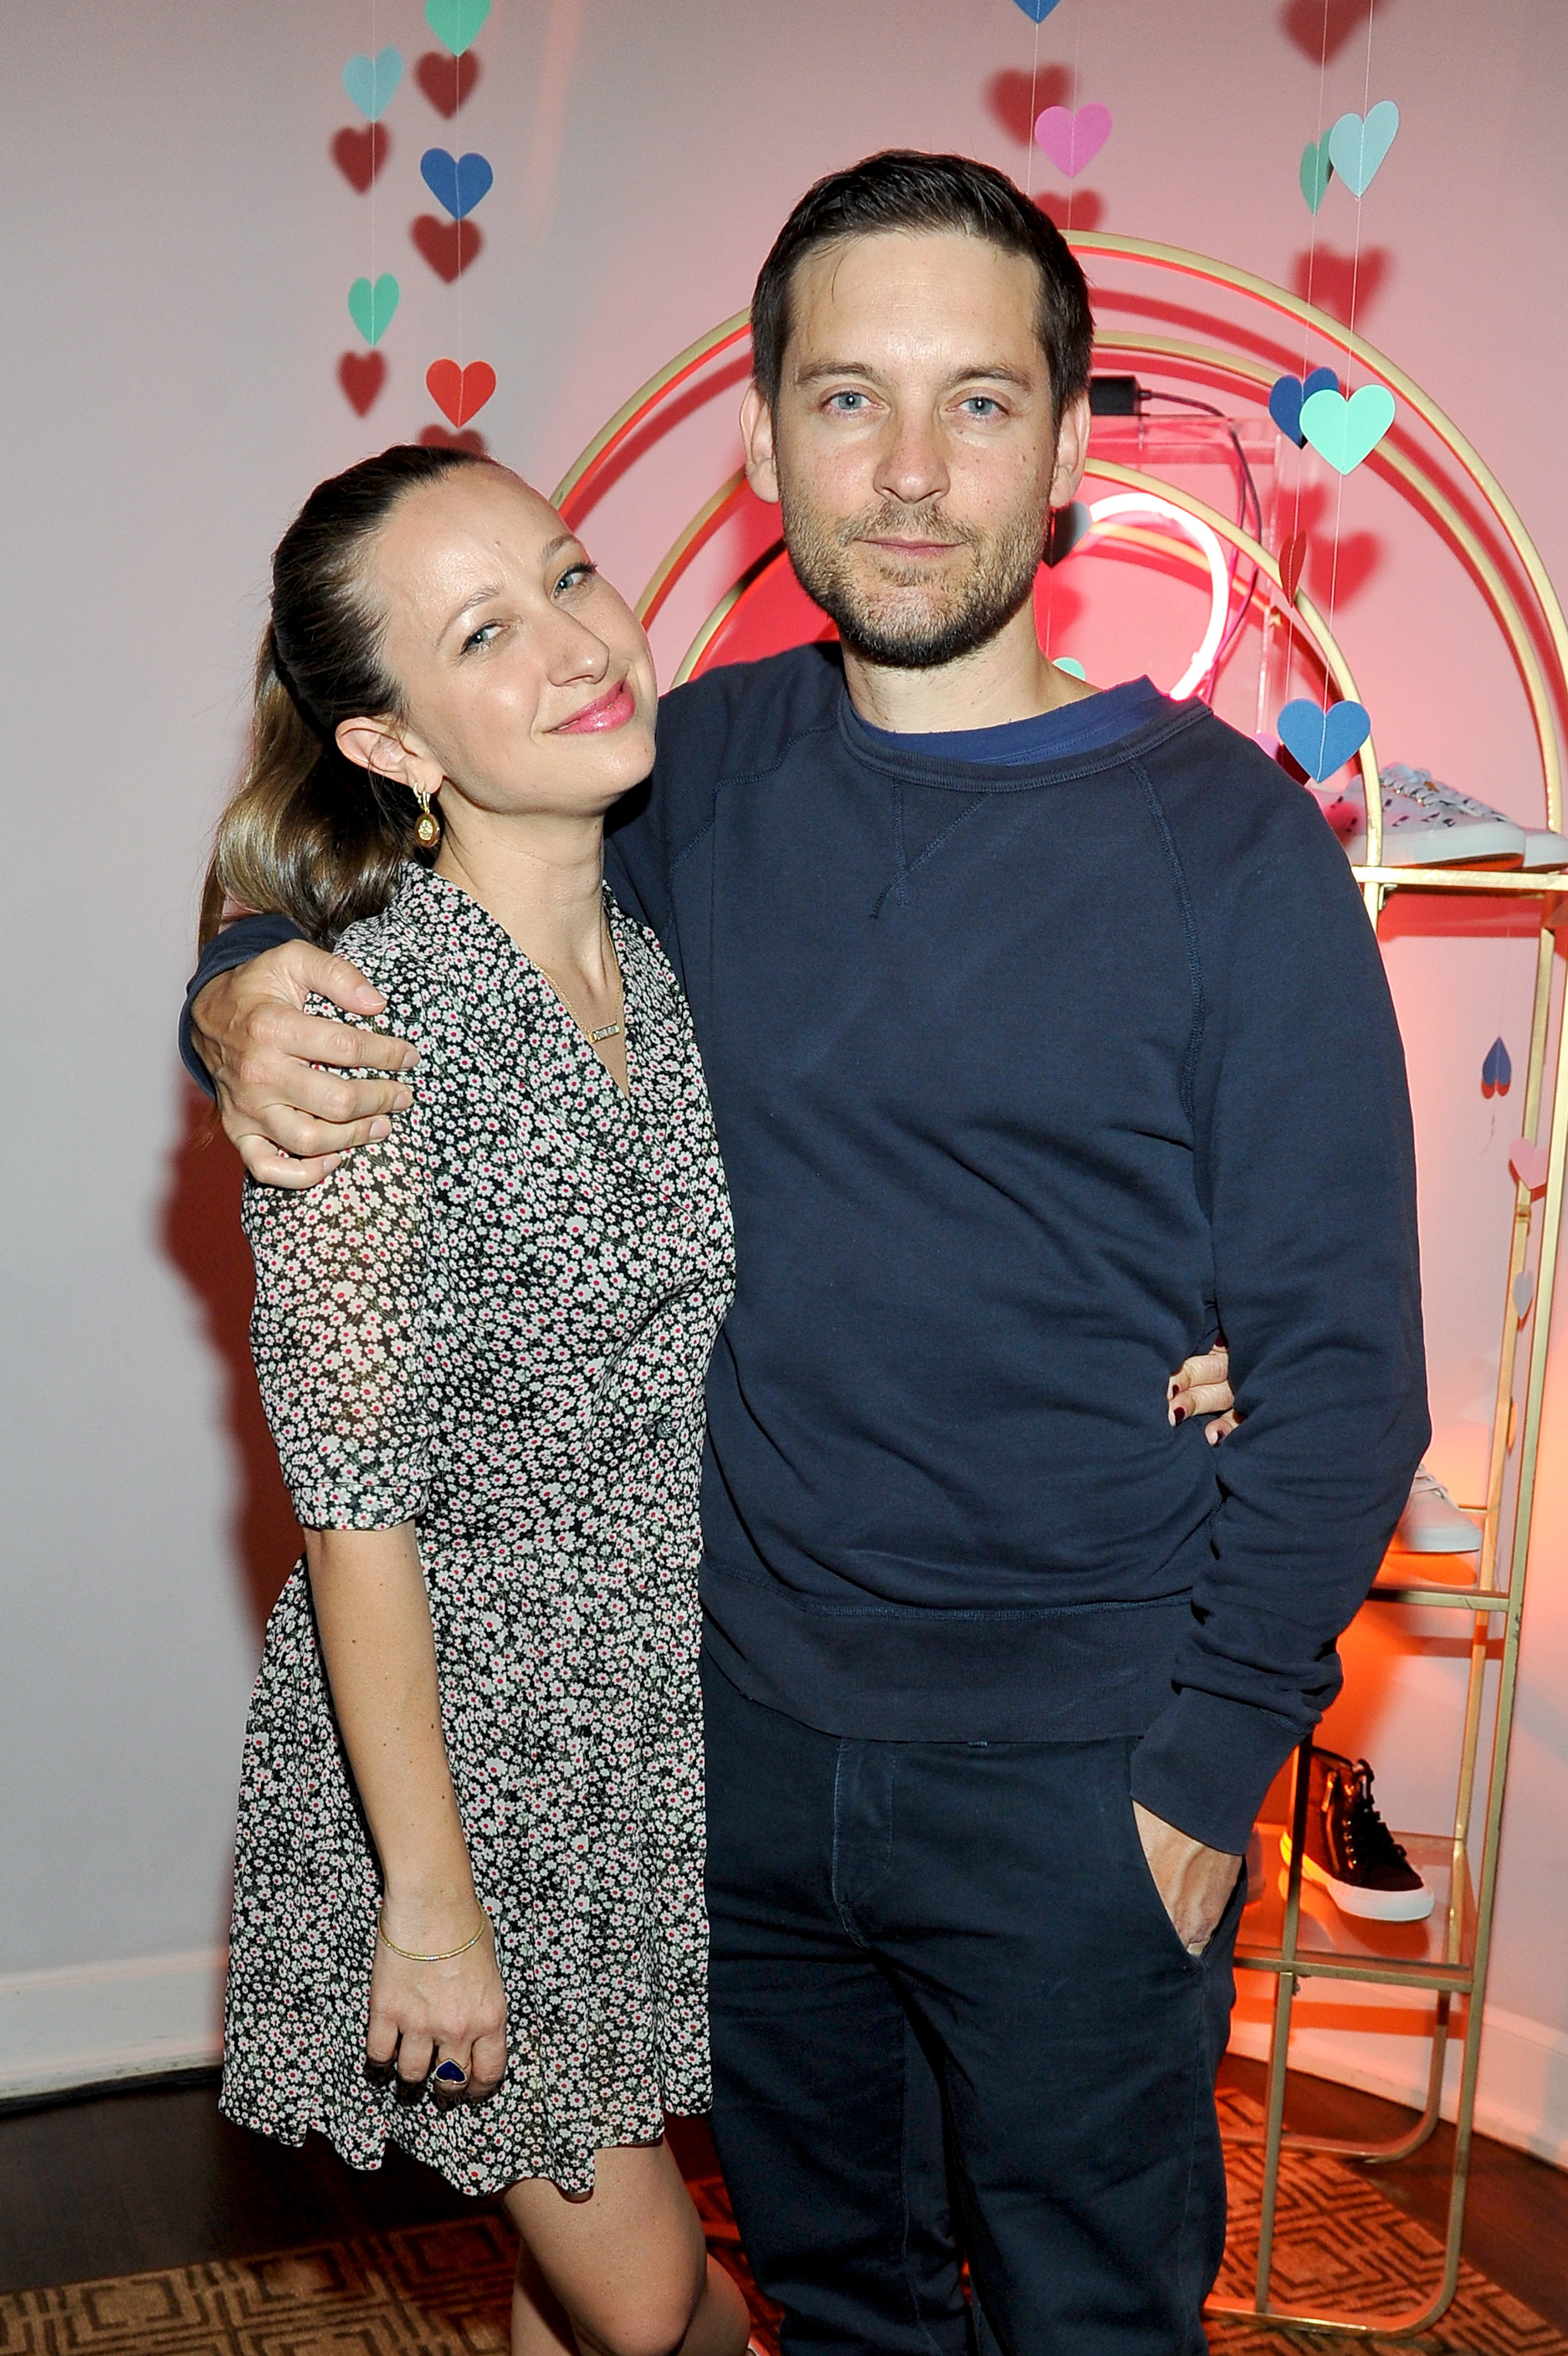 Jennifer Meyer and Tobey Maguire smiling and posing together, with Tobey&#x27;s arm around Jennifer&#x27;s shoulders. They are standing in front of a backdrop with heart decorations